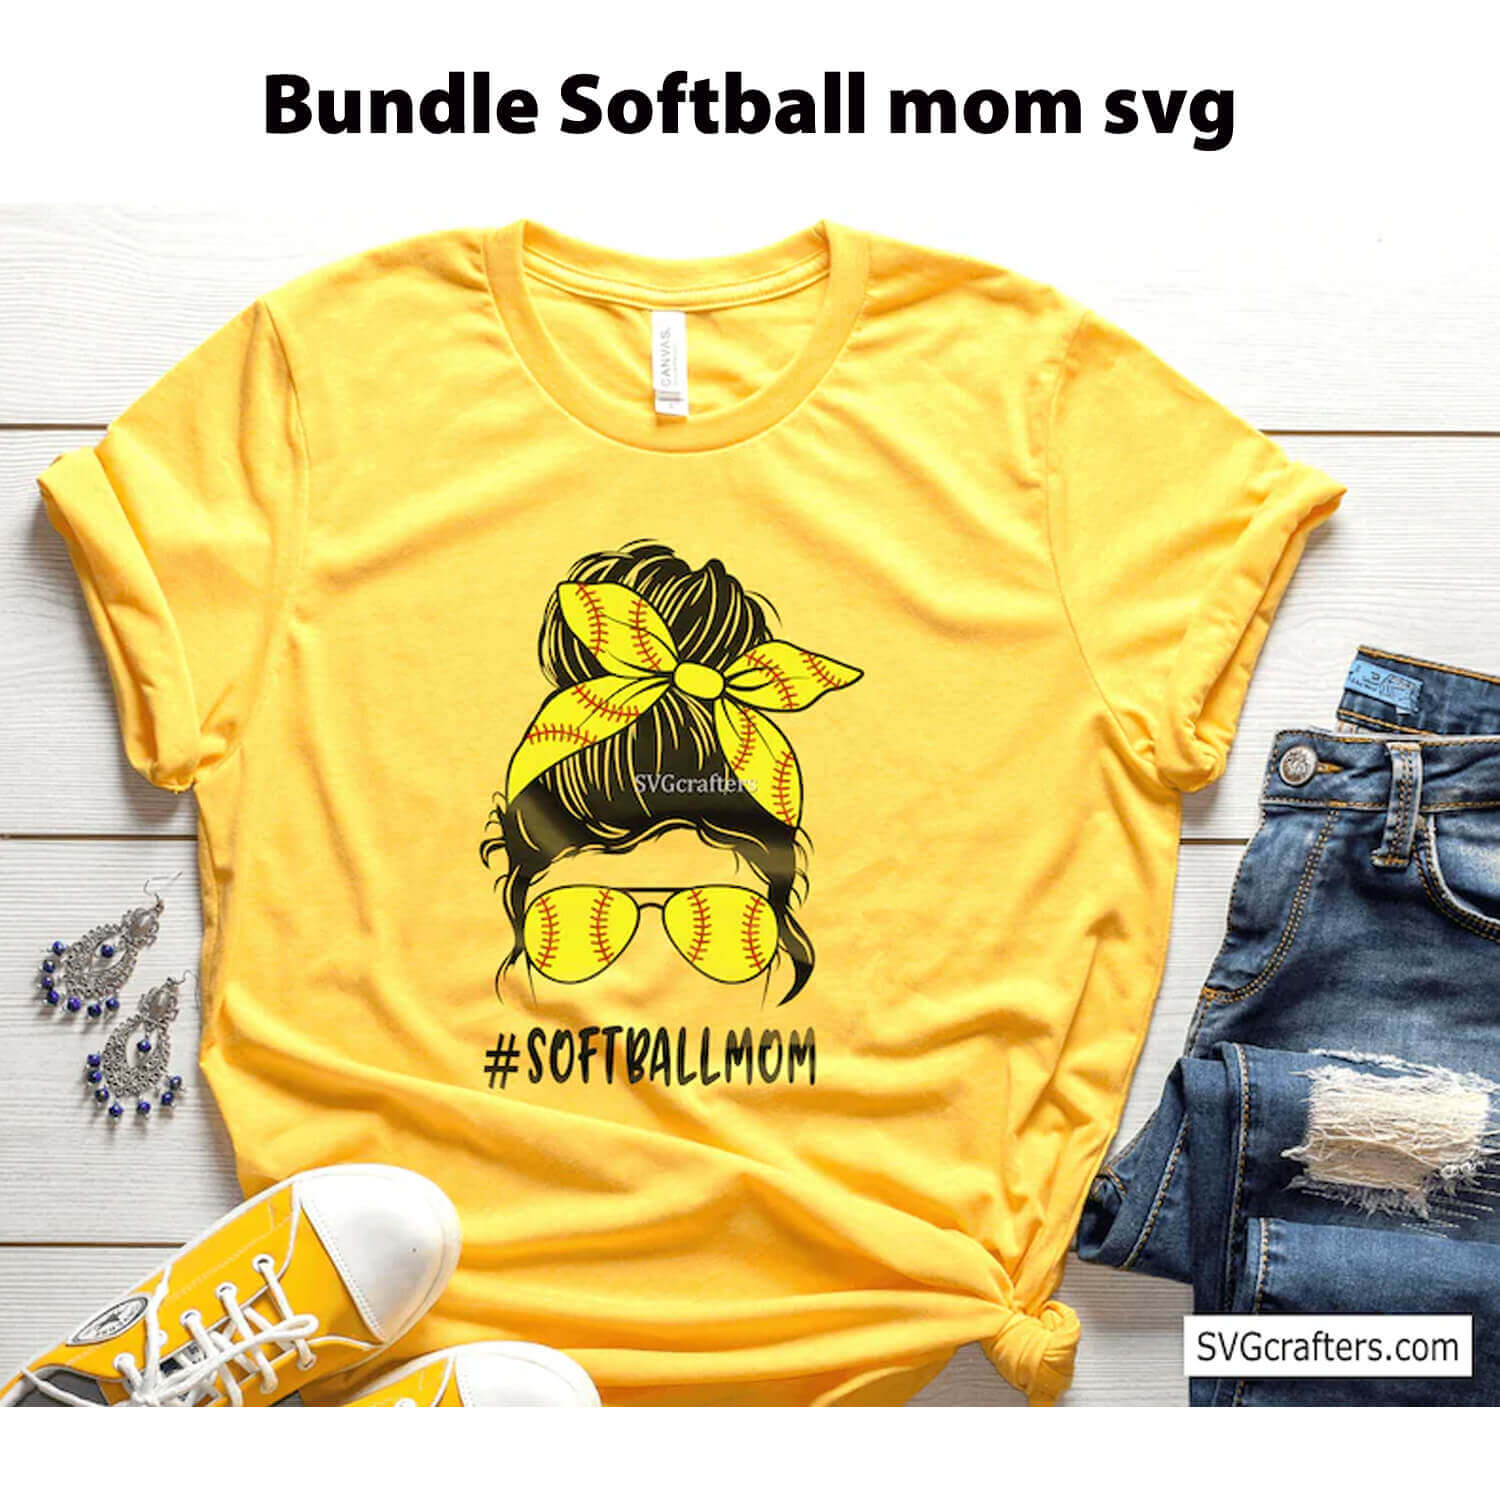 A yellow T-shirt with a softball design mom, jeans and yellow sneakers.